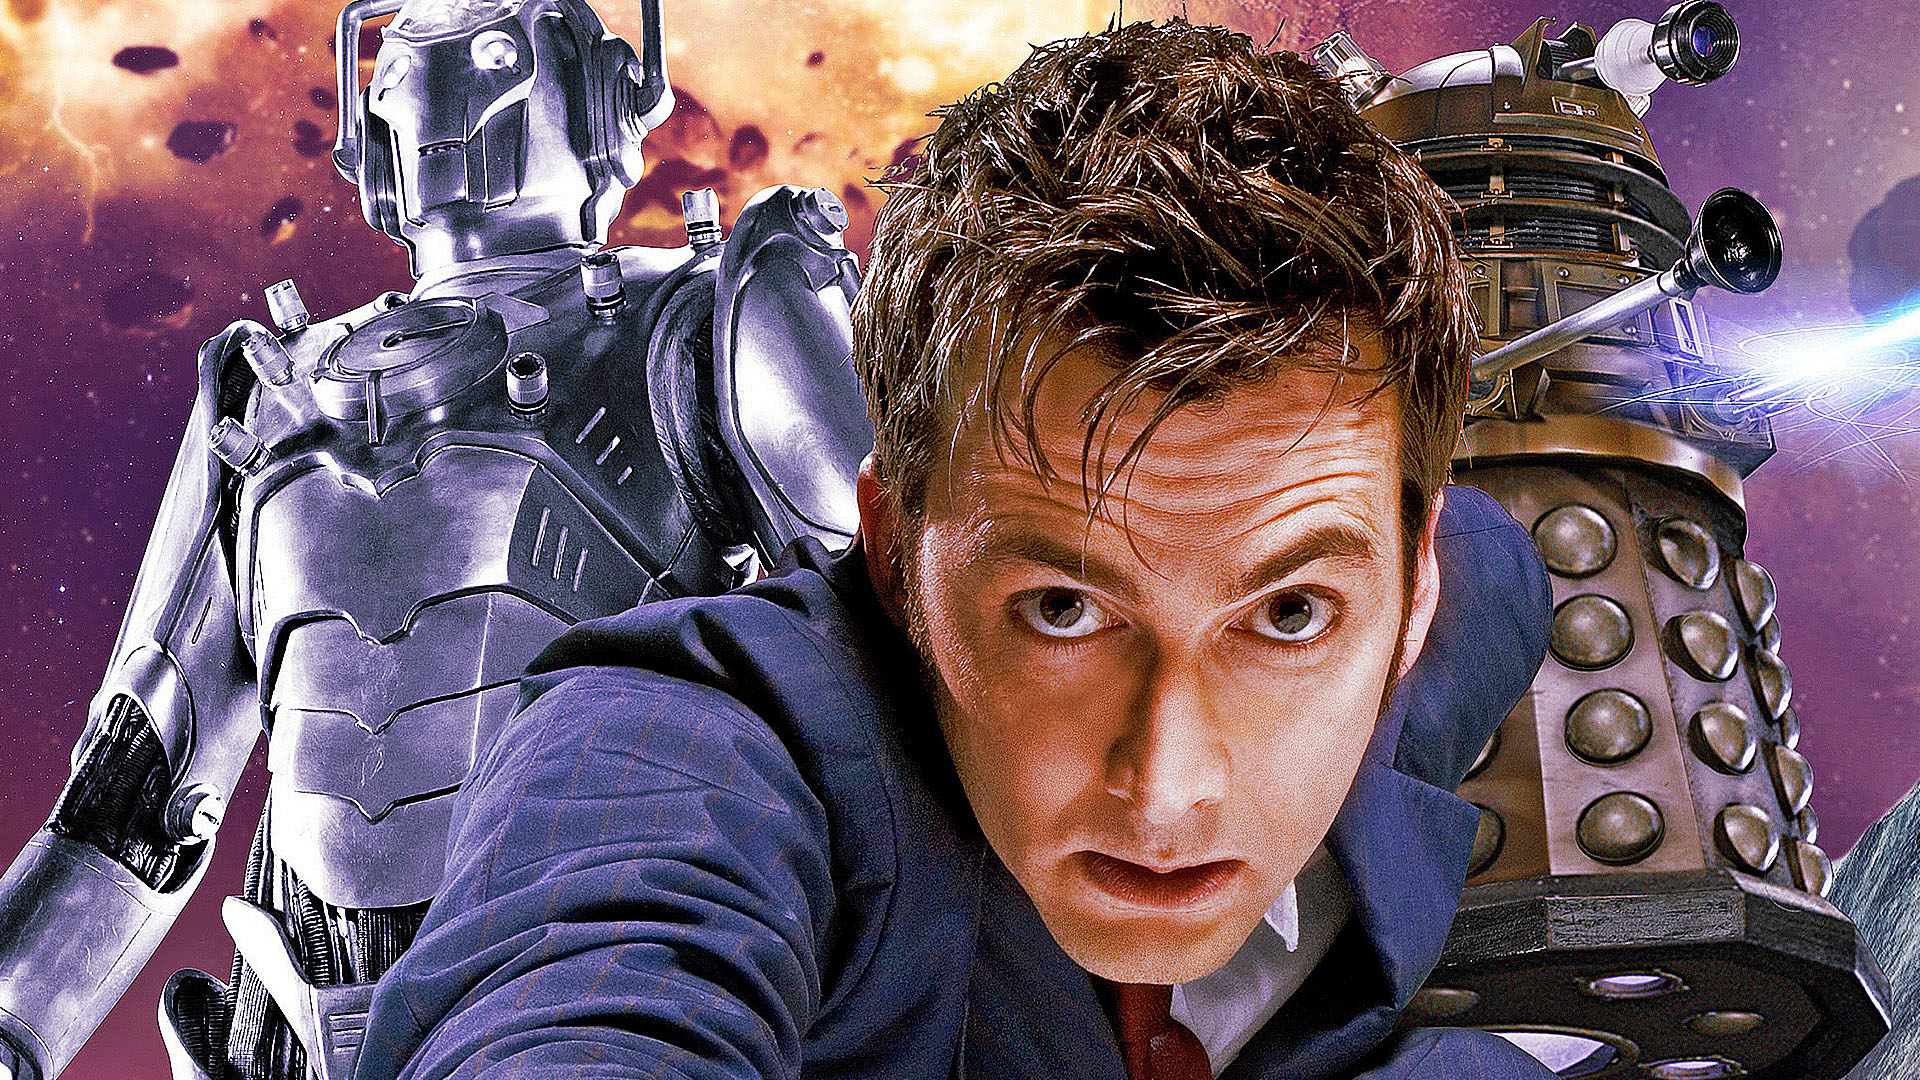 david tennant, tv show, doctor who, dalek images